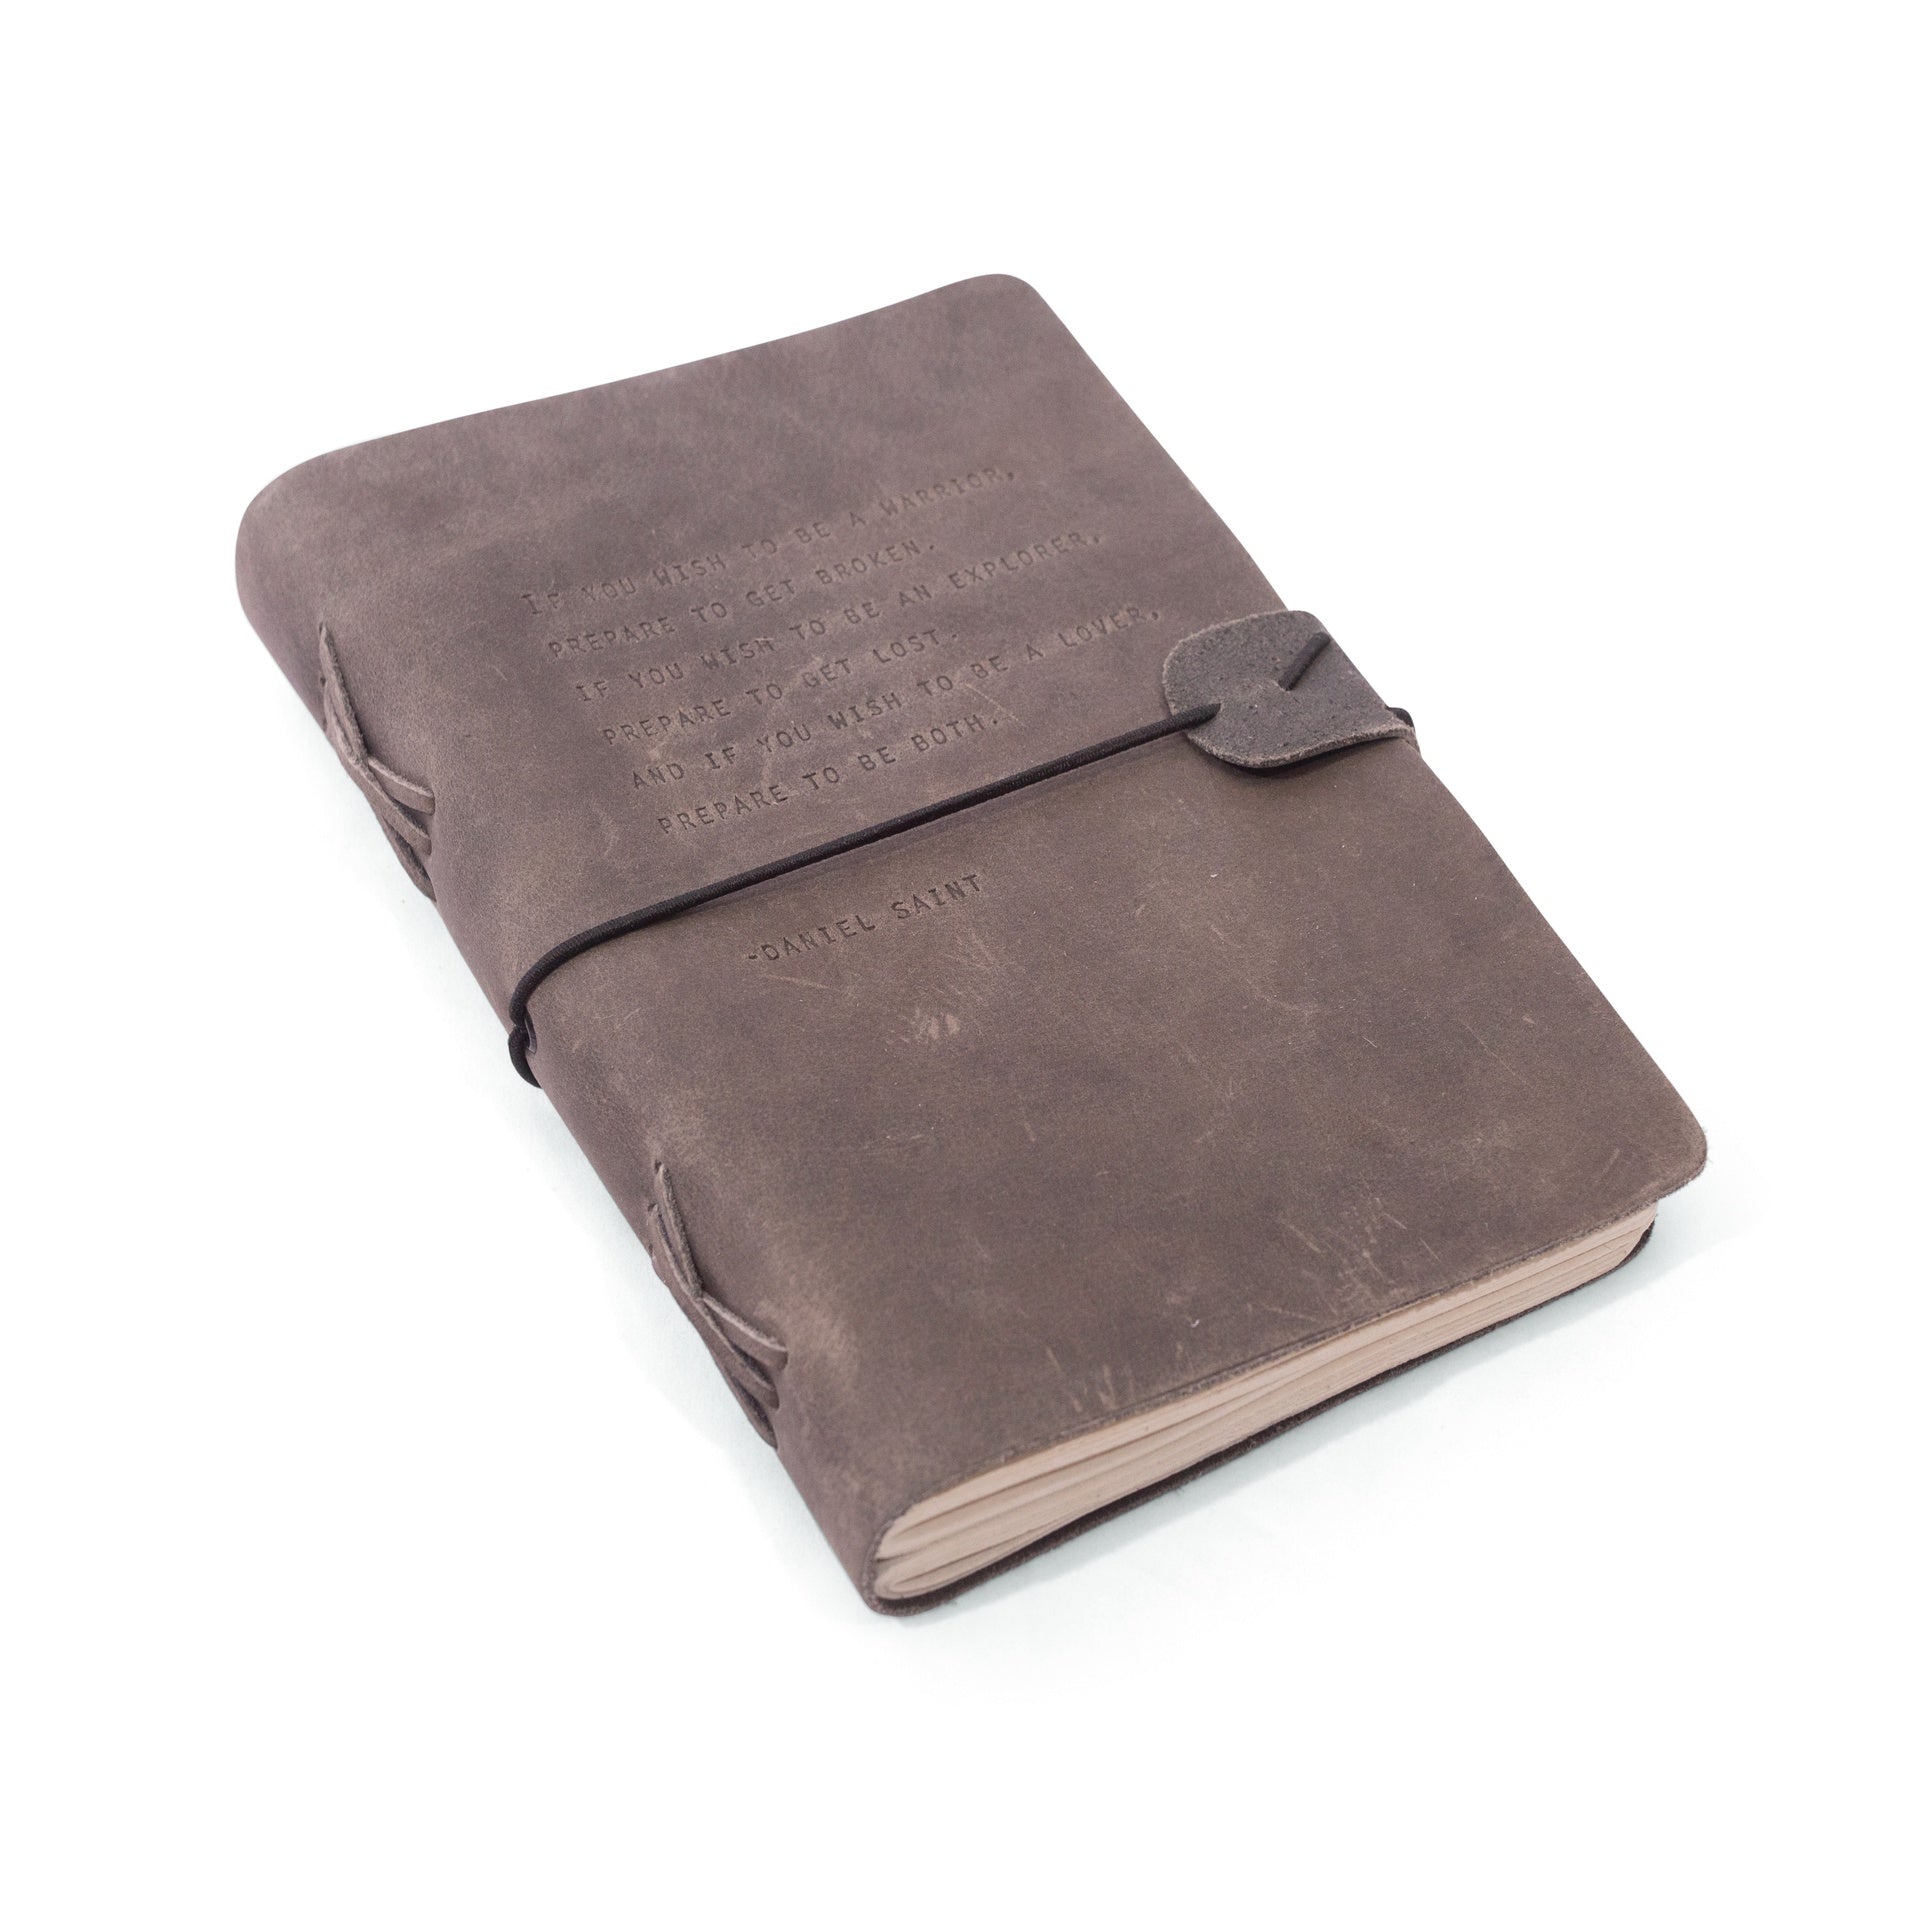 Dead Poets Society - Leather Journal by Sugarboo and Co